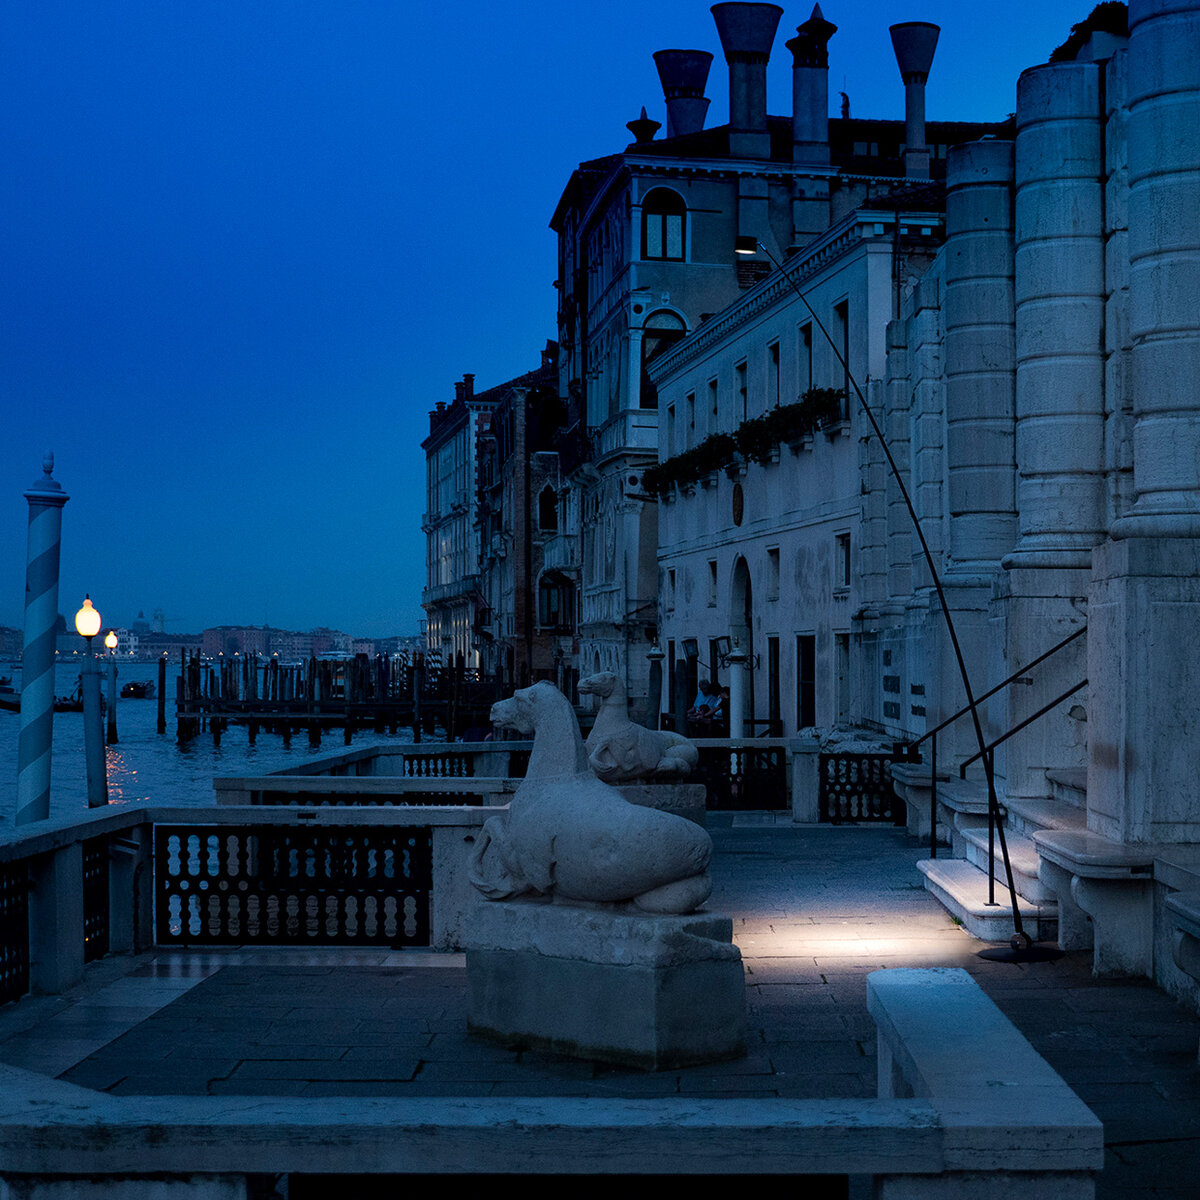 "Incontroluce"  event at Peggy Guggenheim Collection | © Davide Groppi srl | All Rights Reserved